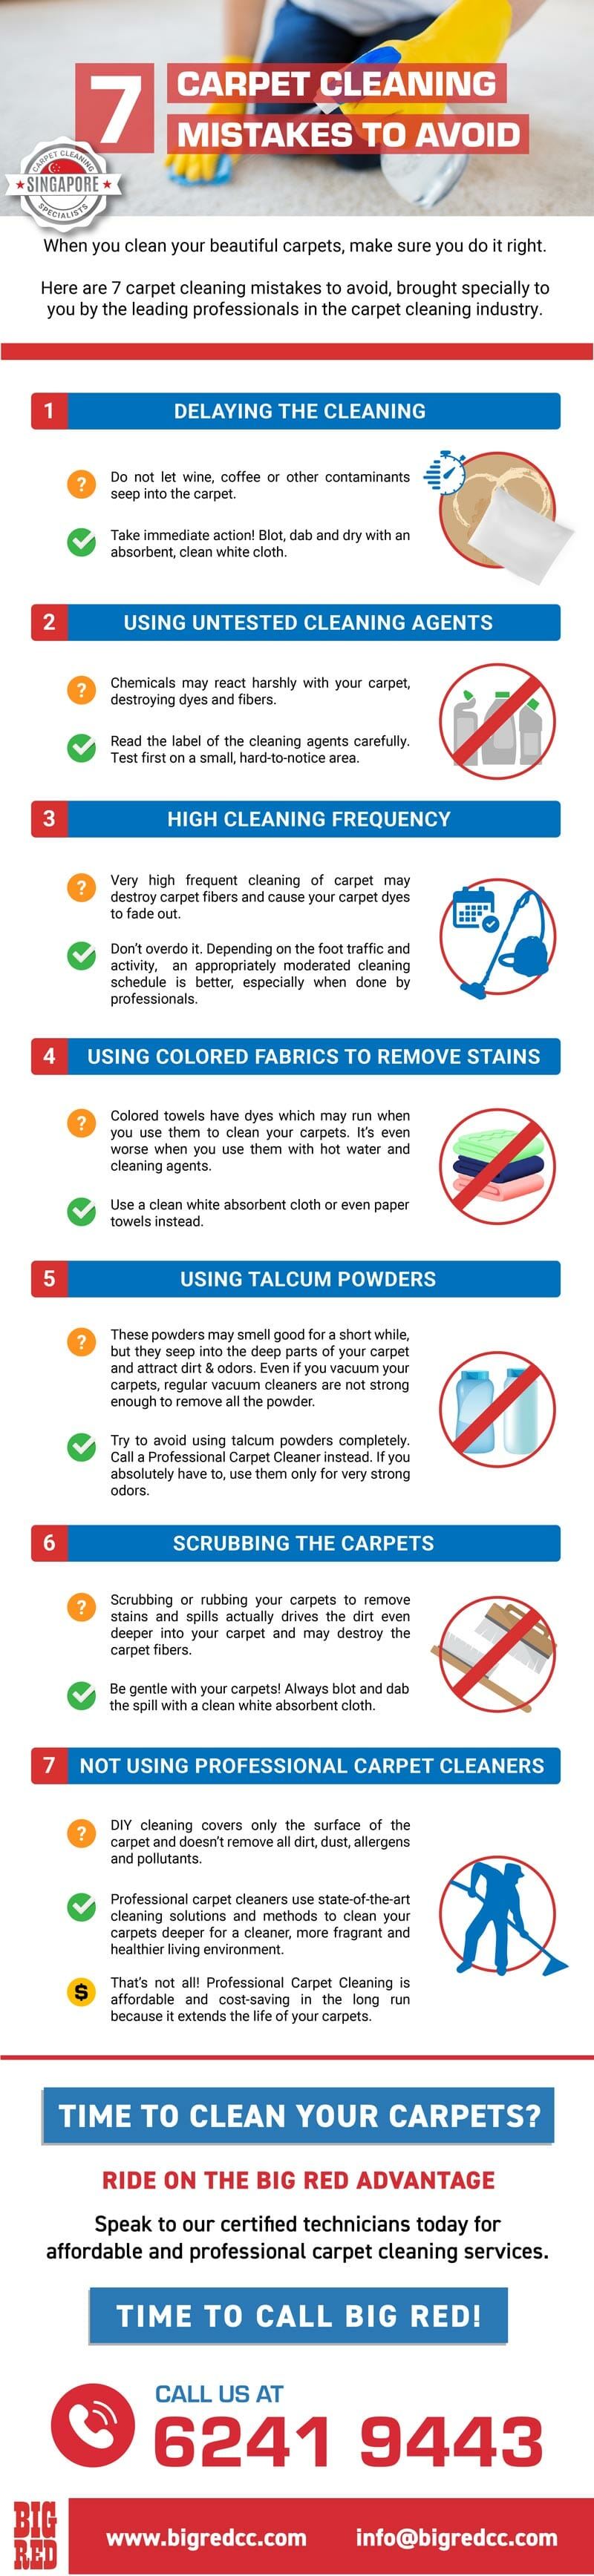 Infographic - 7 Carpet Cleaning Mistakes to Avoid